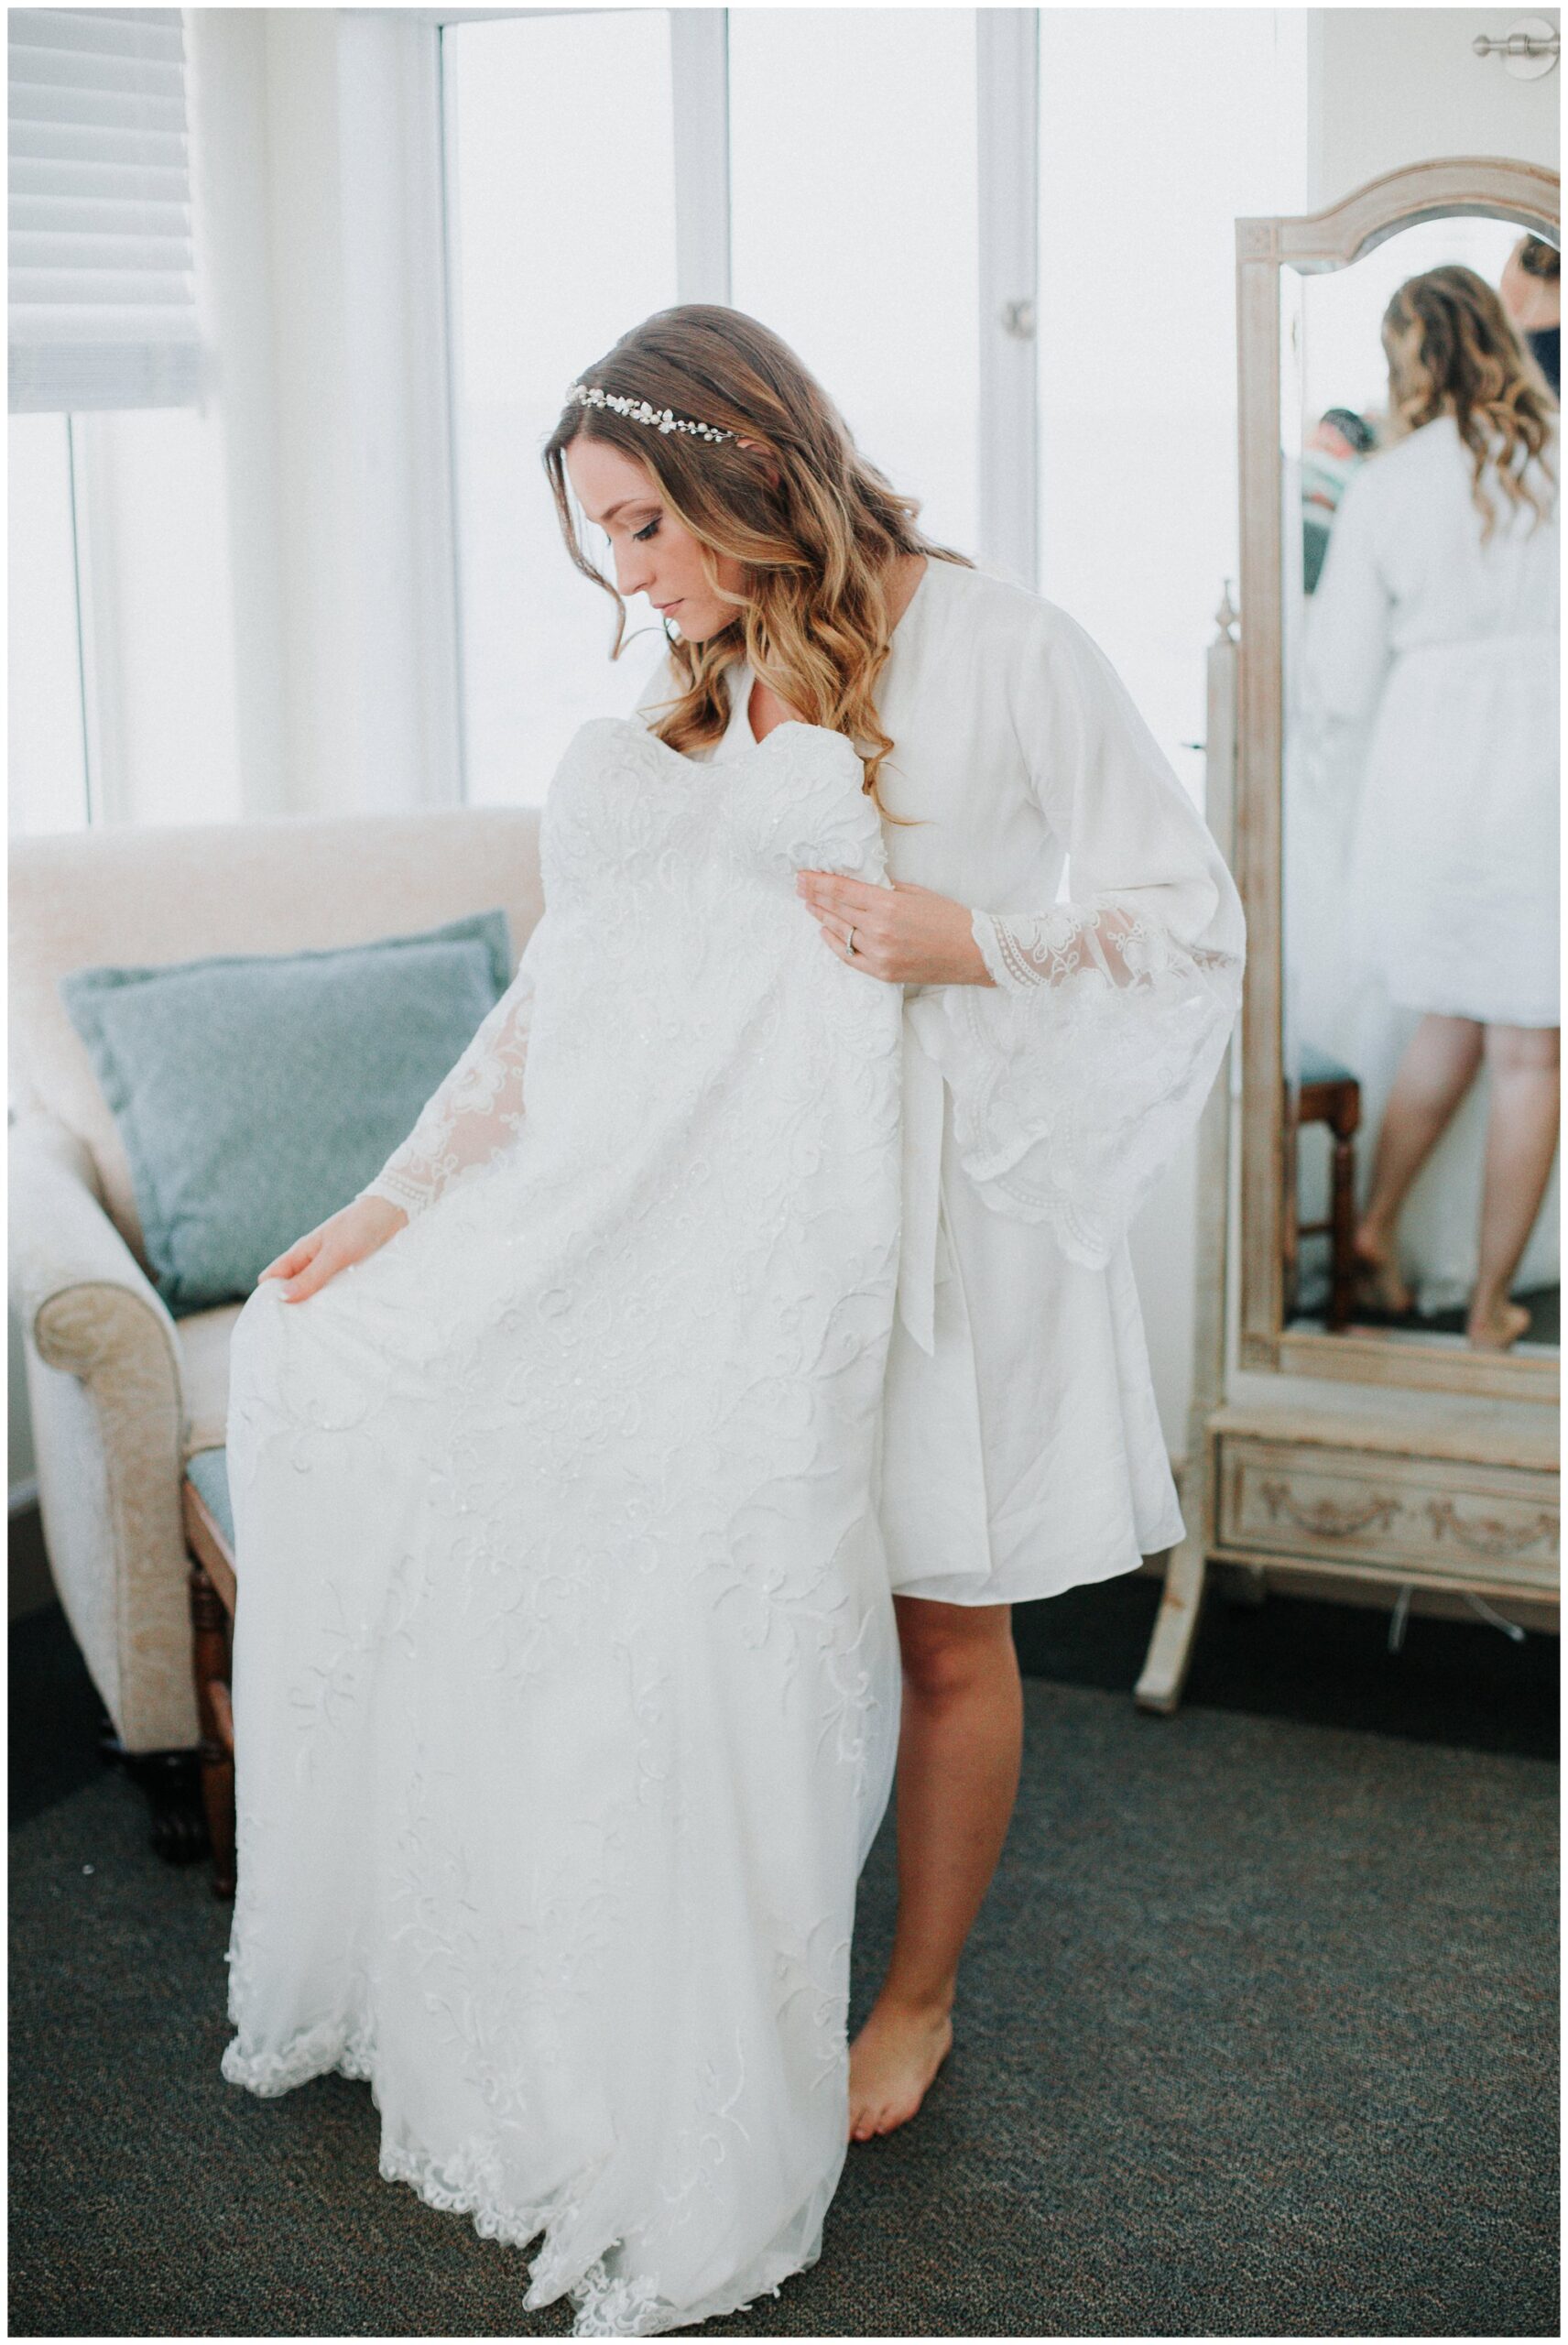 I loved her gorgeous wedding gown. It was perfect for the coastal setting.&nbsp;